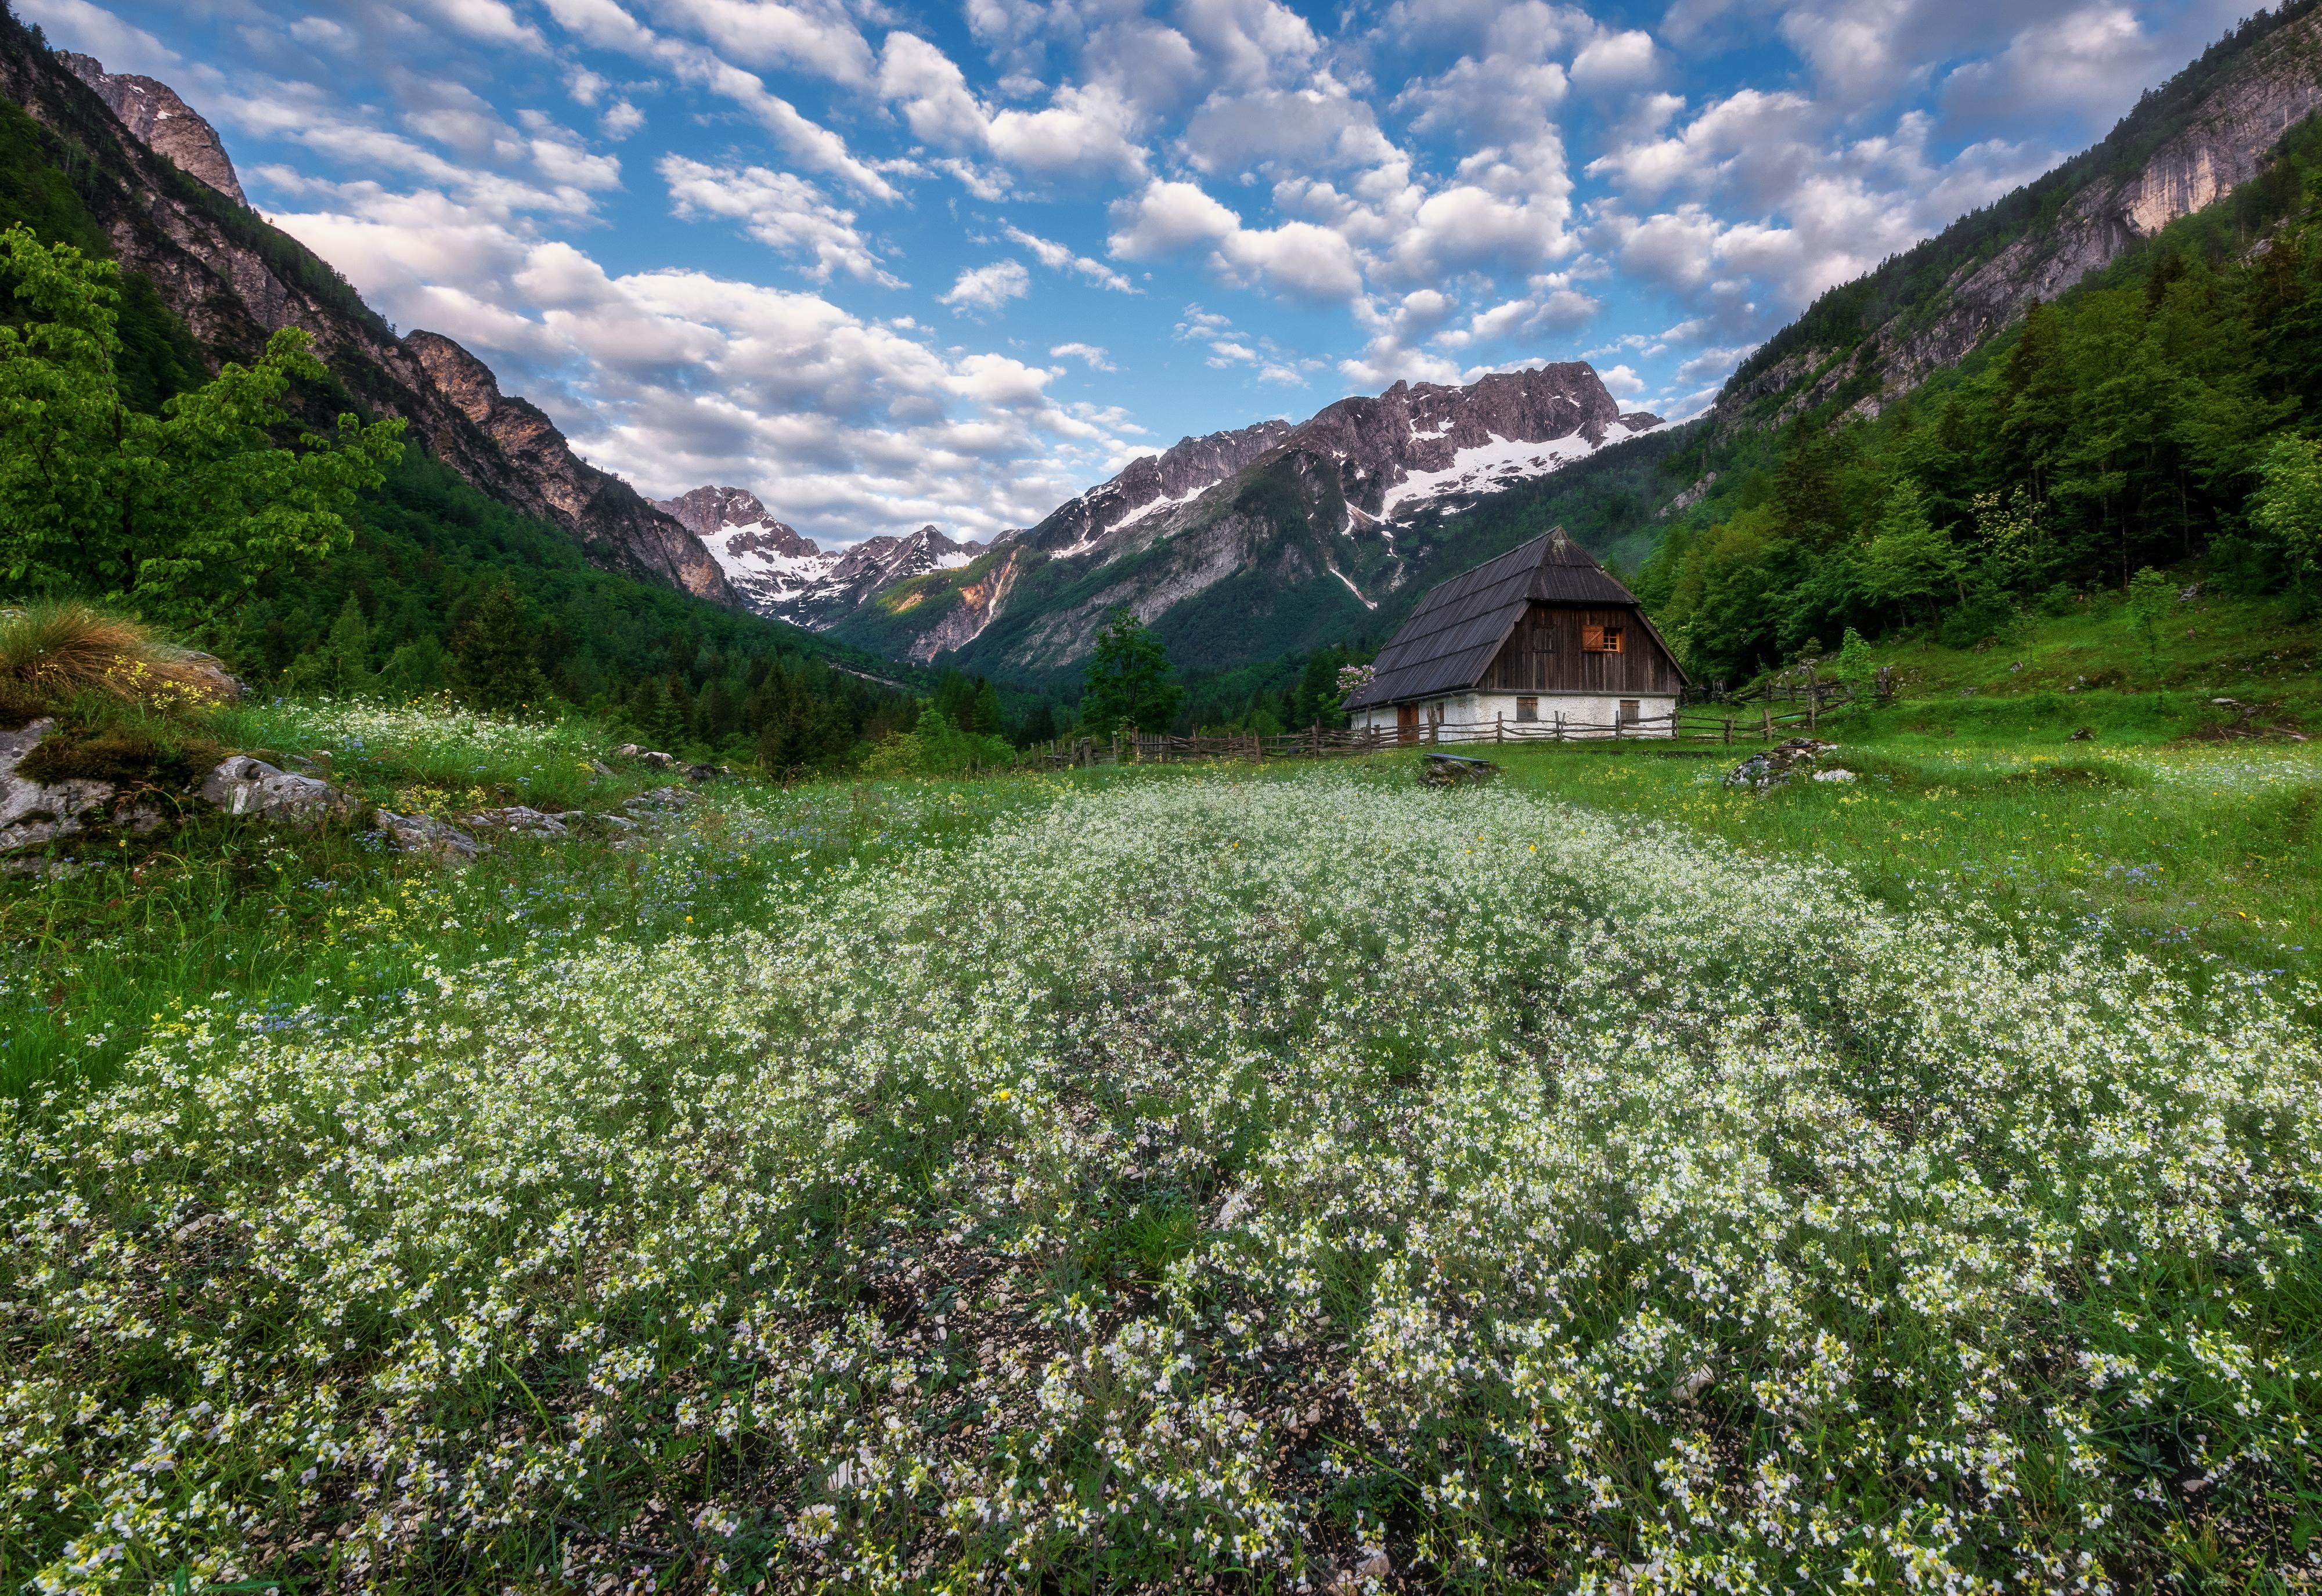 Spring, Cottage, Flower, House, Meadow, Grass, Mountain